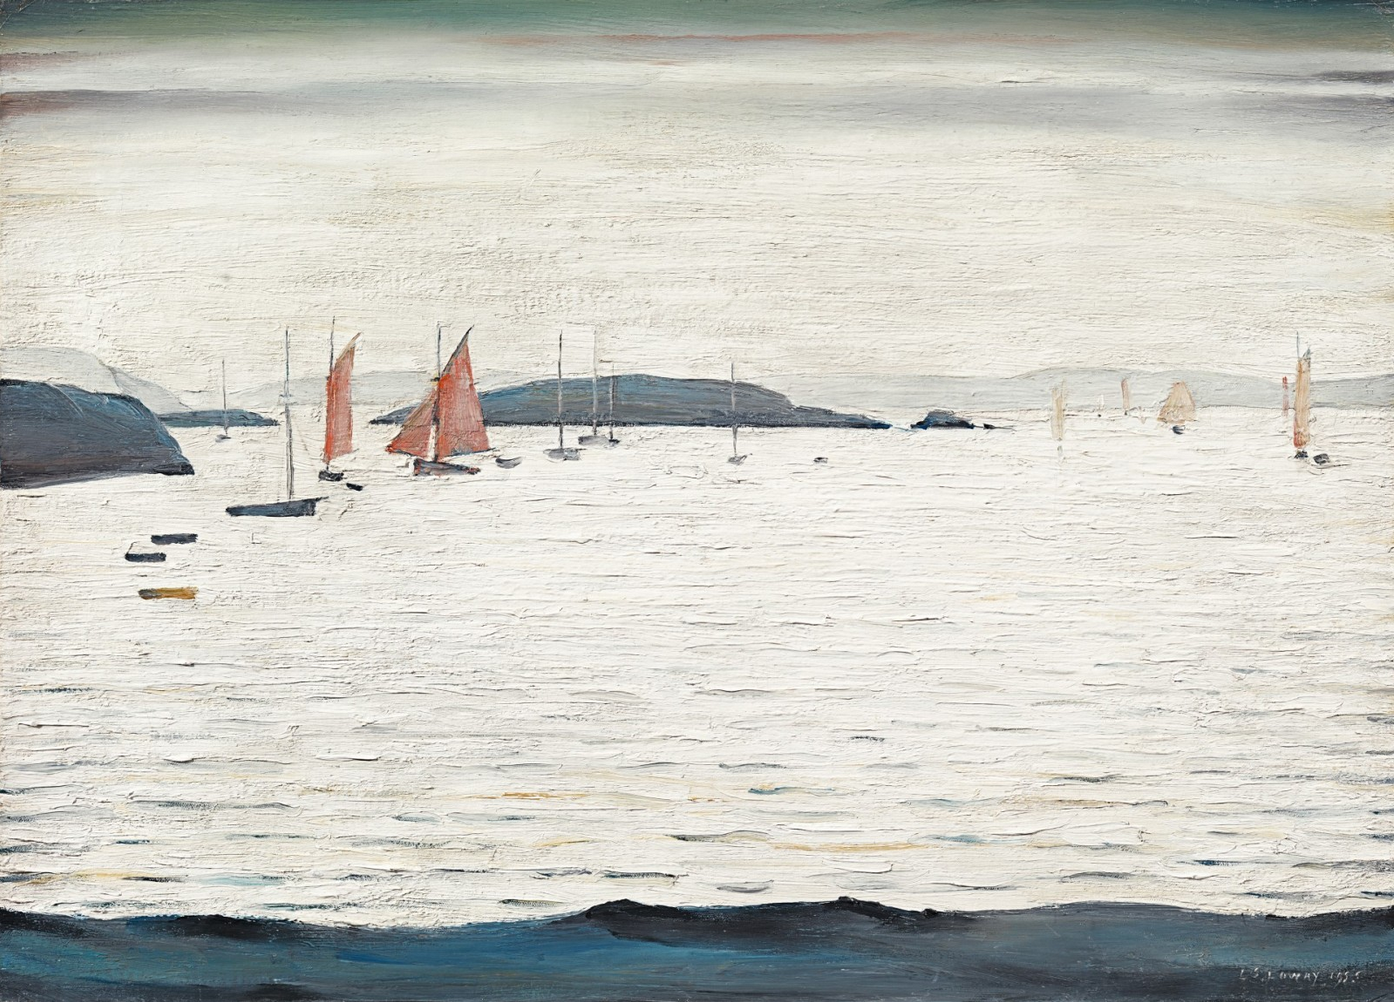 An Estuary (1955) by Laurence Stephen Lowry (1887 - 1976), English artist.